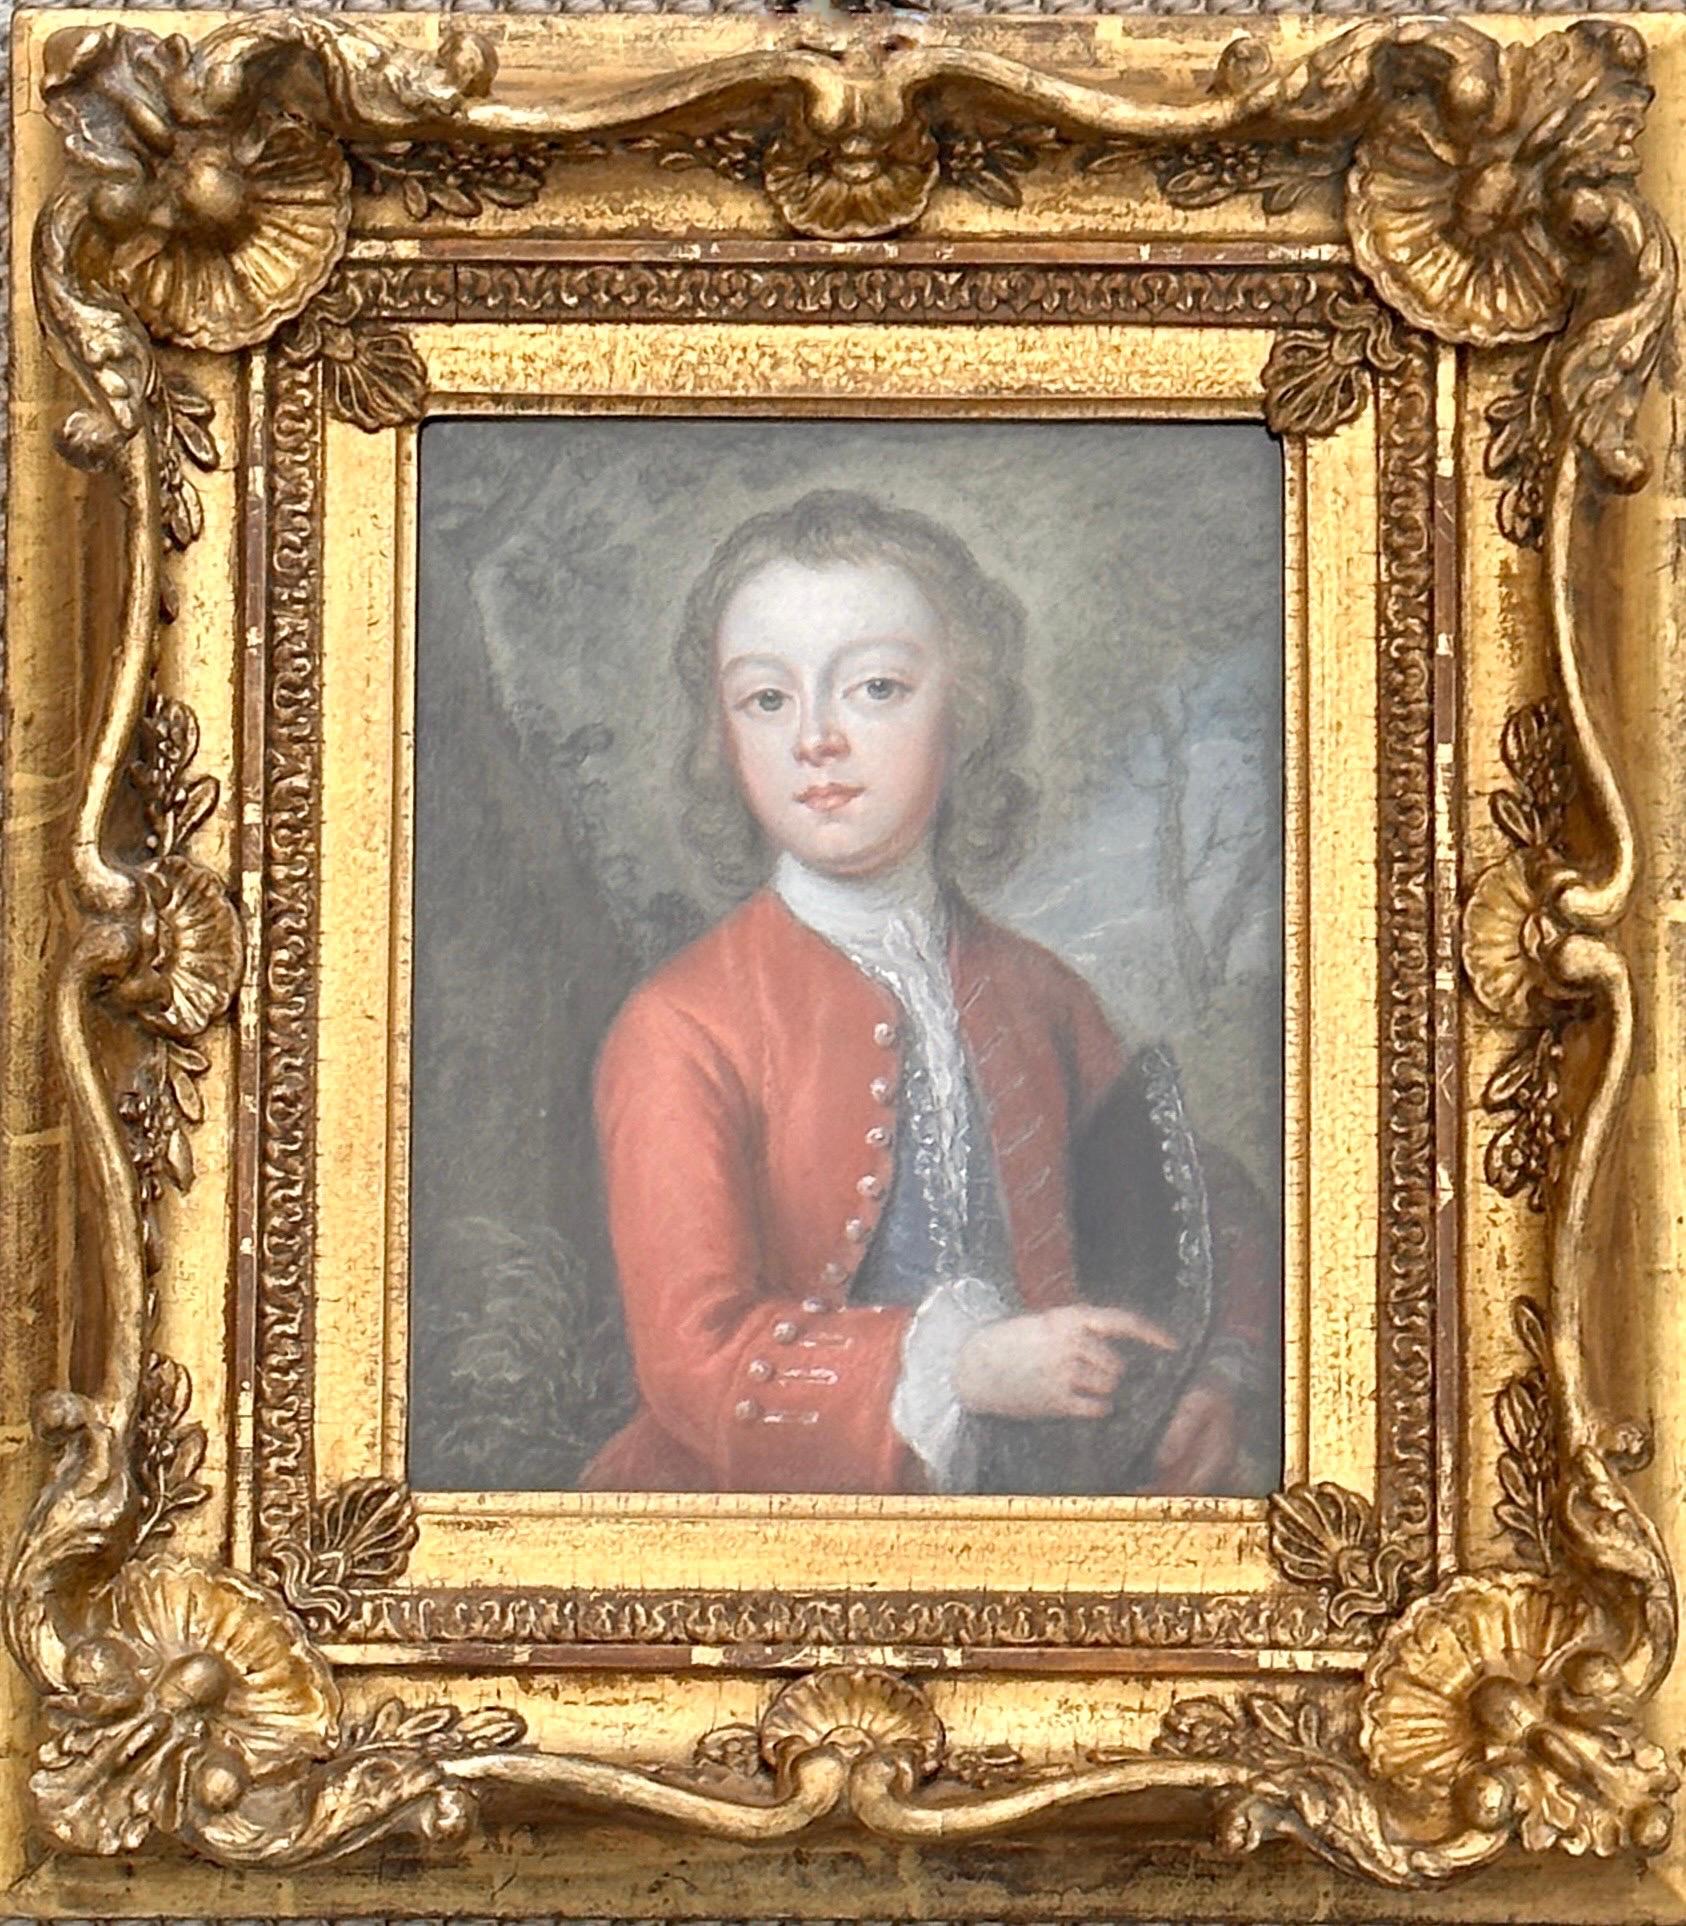 18th century pastel portrait of a young boy in a wooded landscape